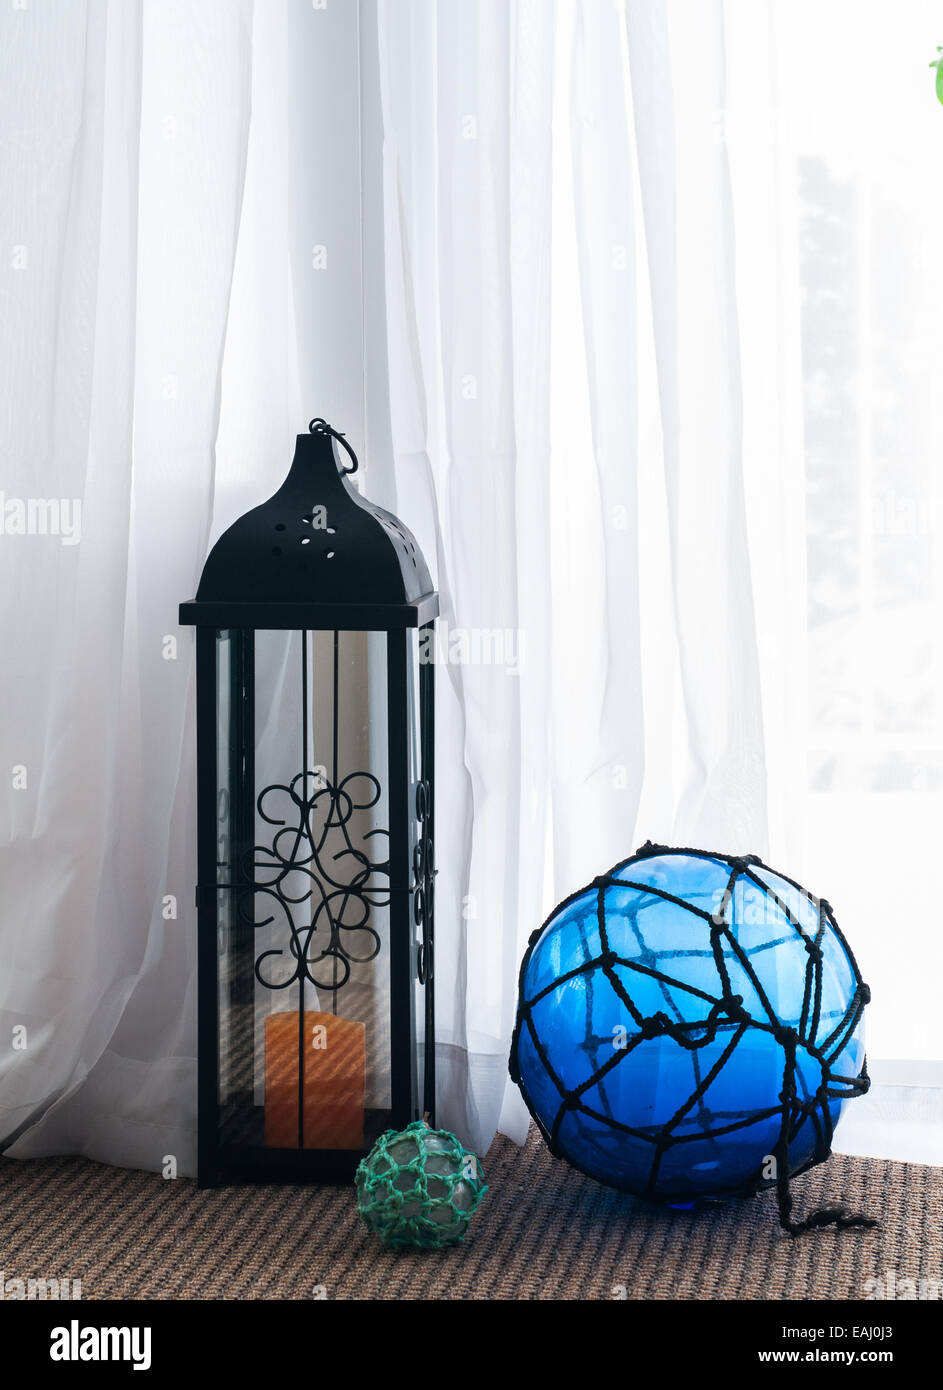 Hurricane lantern in front of sheer curtain backlit by the sun Stock Photo